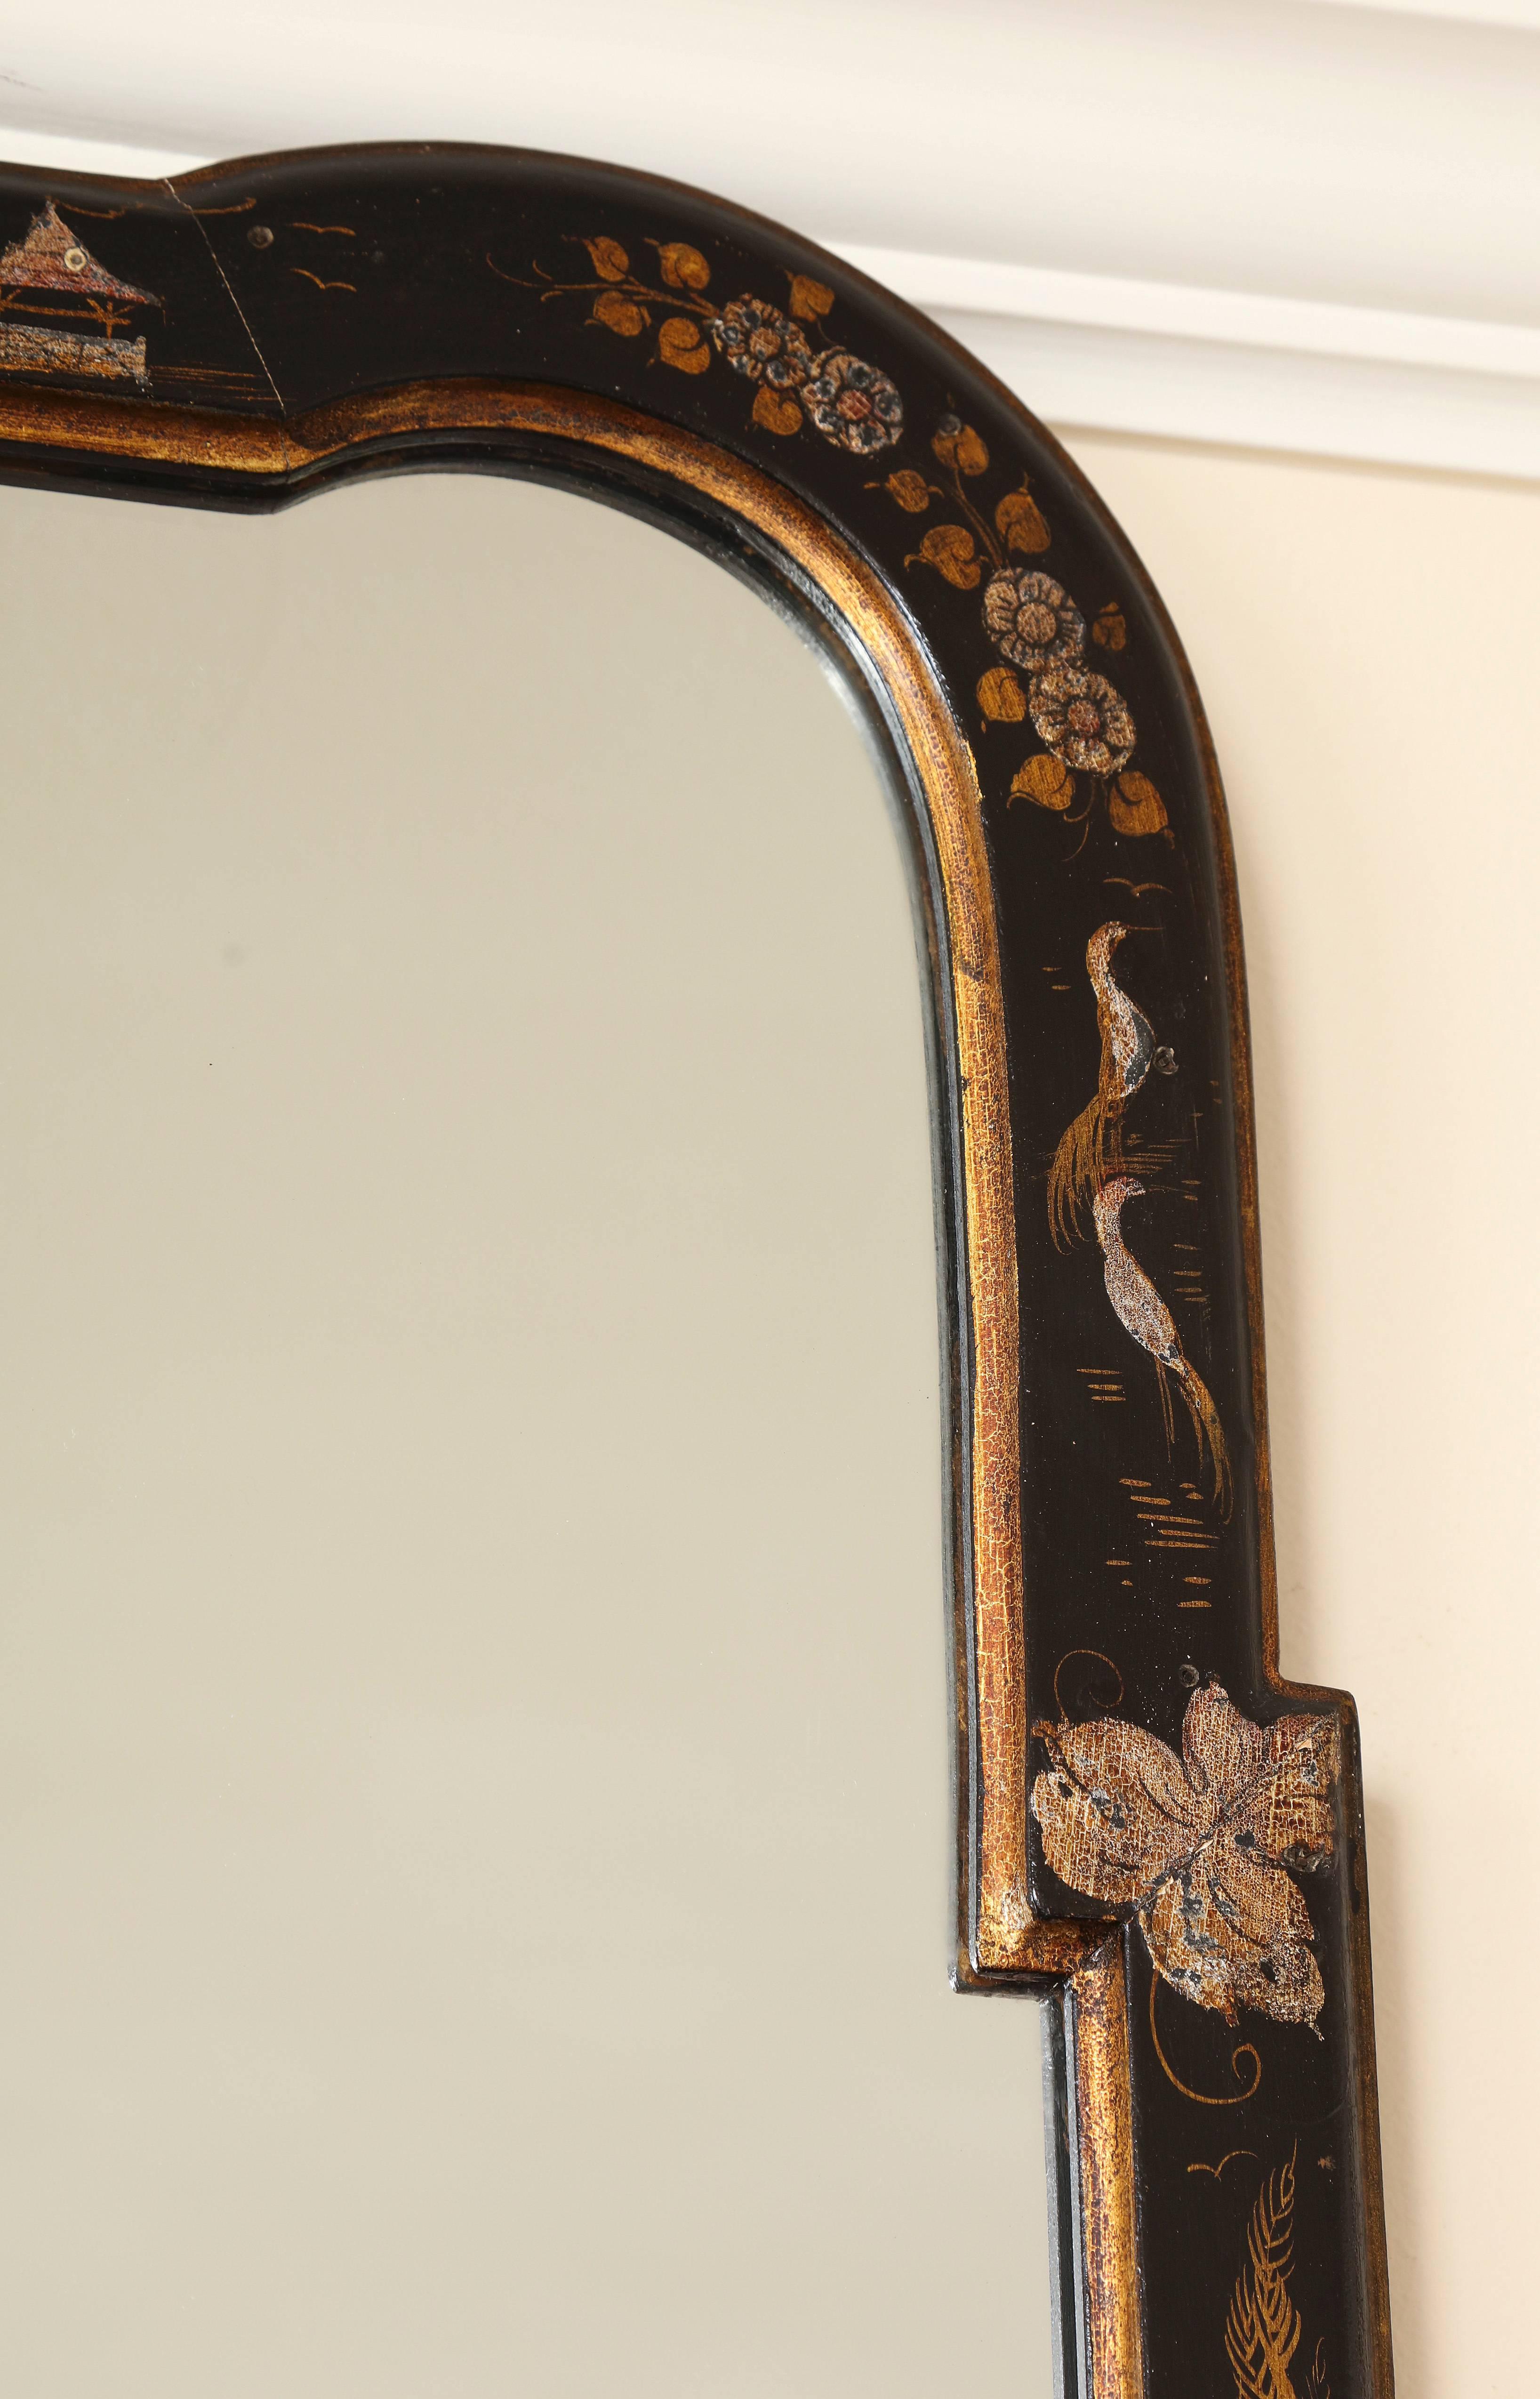 A chic and classic Italian vintage Mid-Century Modern chinoiserie wall mirror with hand-painted gilt and polychrome decoration on a black background. All original and in excellent condition; with its label and inventory number on the back.